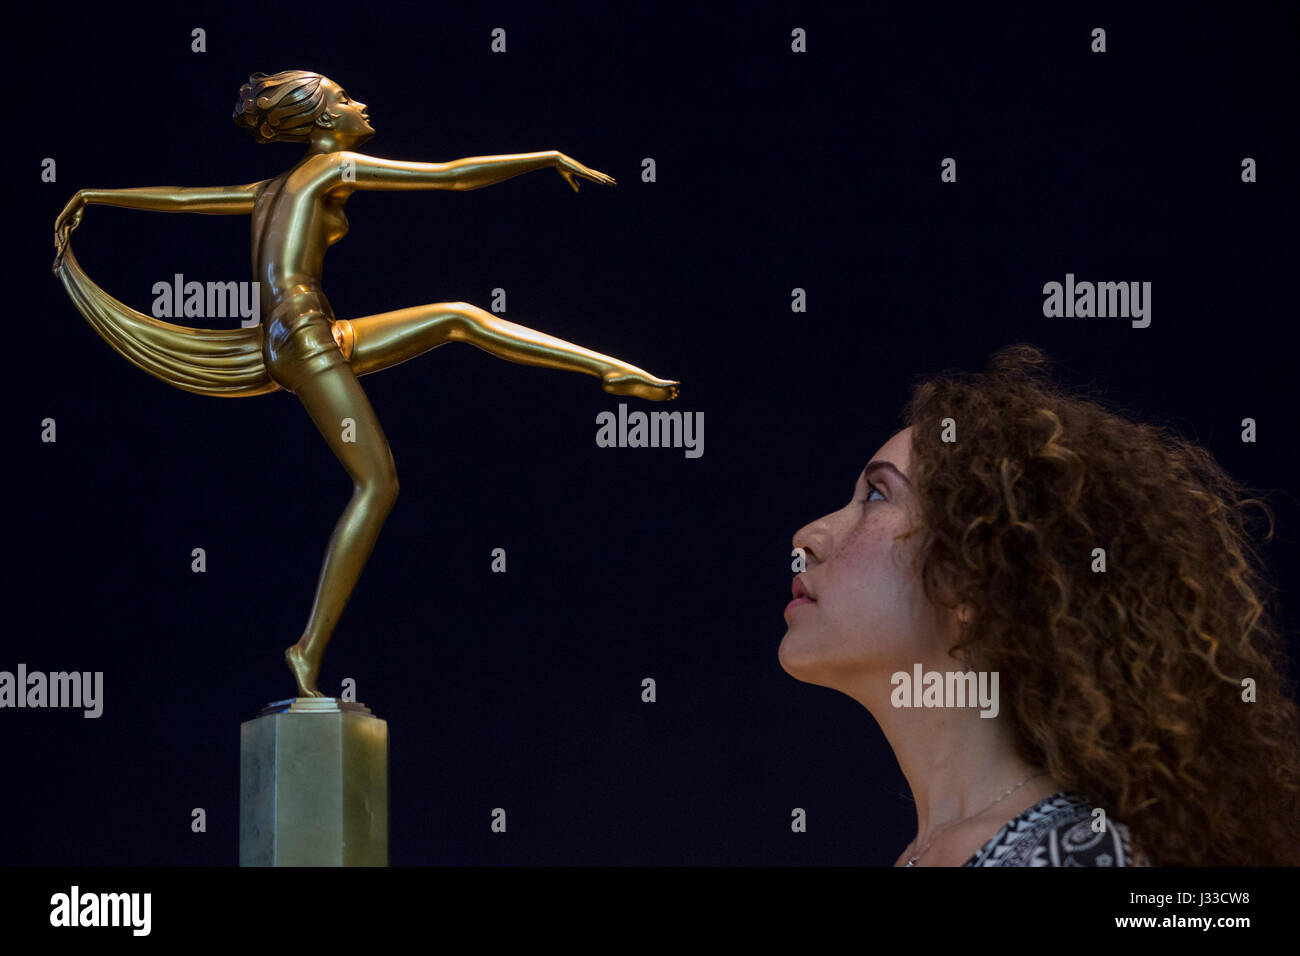 London, UK. 2 May 2017. Bonhams specialist Raphaelle Benabou looks at an art deco silvered bronze and onyx figure of a scarf dancer by Stefan Dakon, est. USD 1,500-2,000.  Bonhams London presents highlights from the forthcoming sale of Jackie Collins estate 'A Life in Chapters' which will take place on 16-17 May 2017 at Bonhams in Los Angeles. Stock Photo